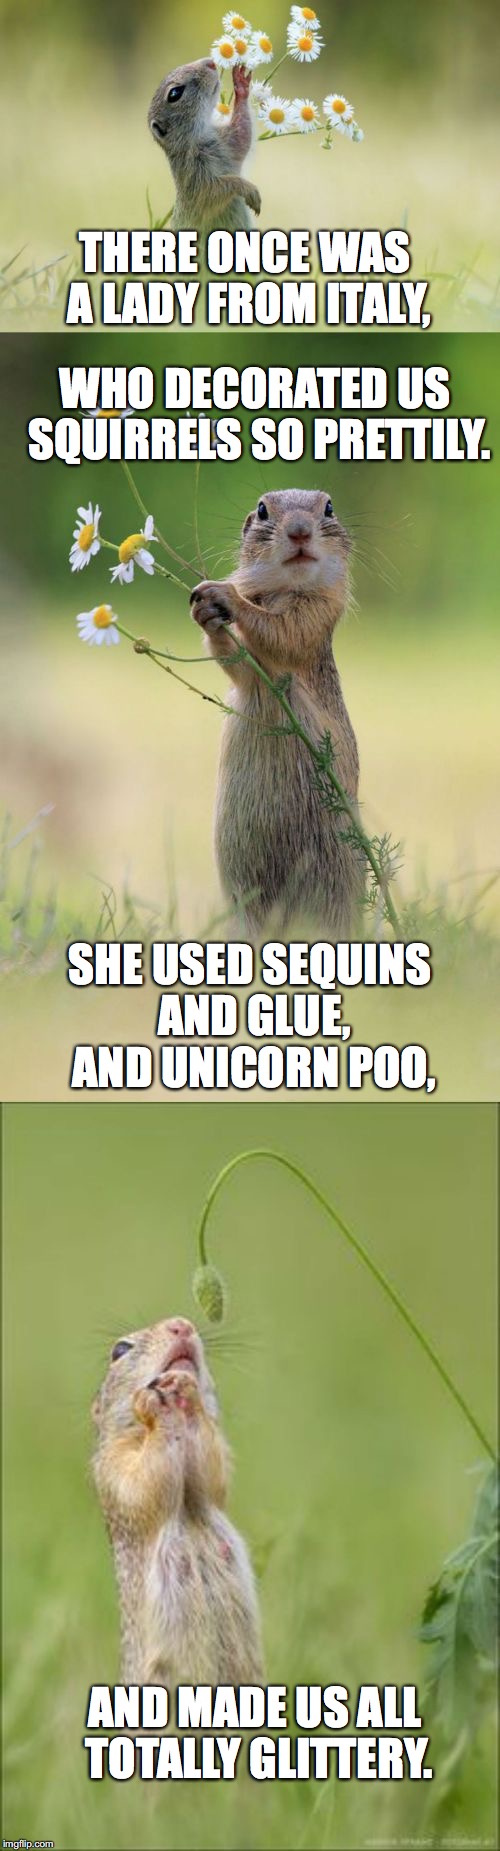 I can't stop thinking of rhymes with Italy | THERE ONCE WAS A LADY FROM ITALY, WHO DECORATED US SQUIRRELS SO PRETTILY. SHE USED SEQUINS AND GLUE, AND UNICORN POO, AND MADE US ALL TOTALLY GLITTERY. | image tagged in meme,squirrel week,glitter | made w/ Imgflip meme maker